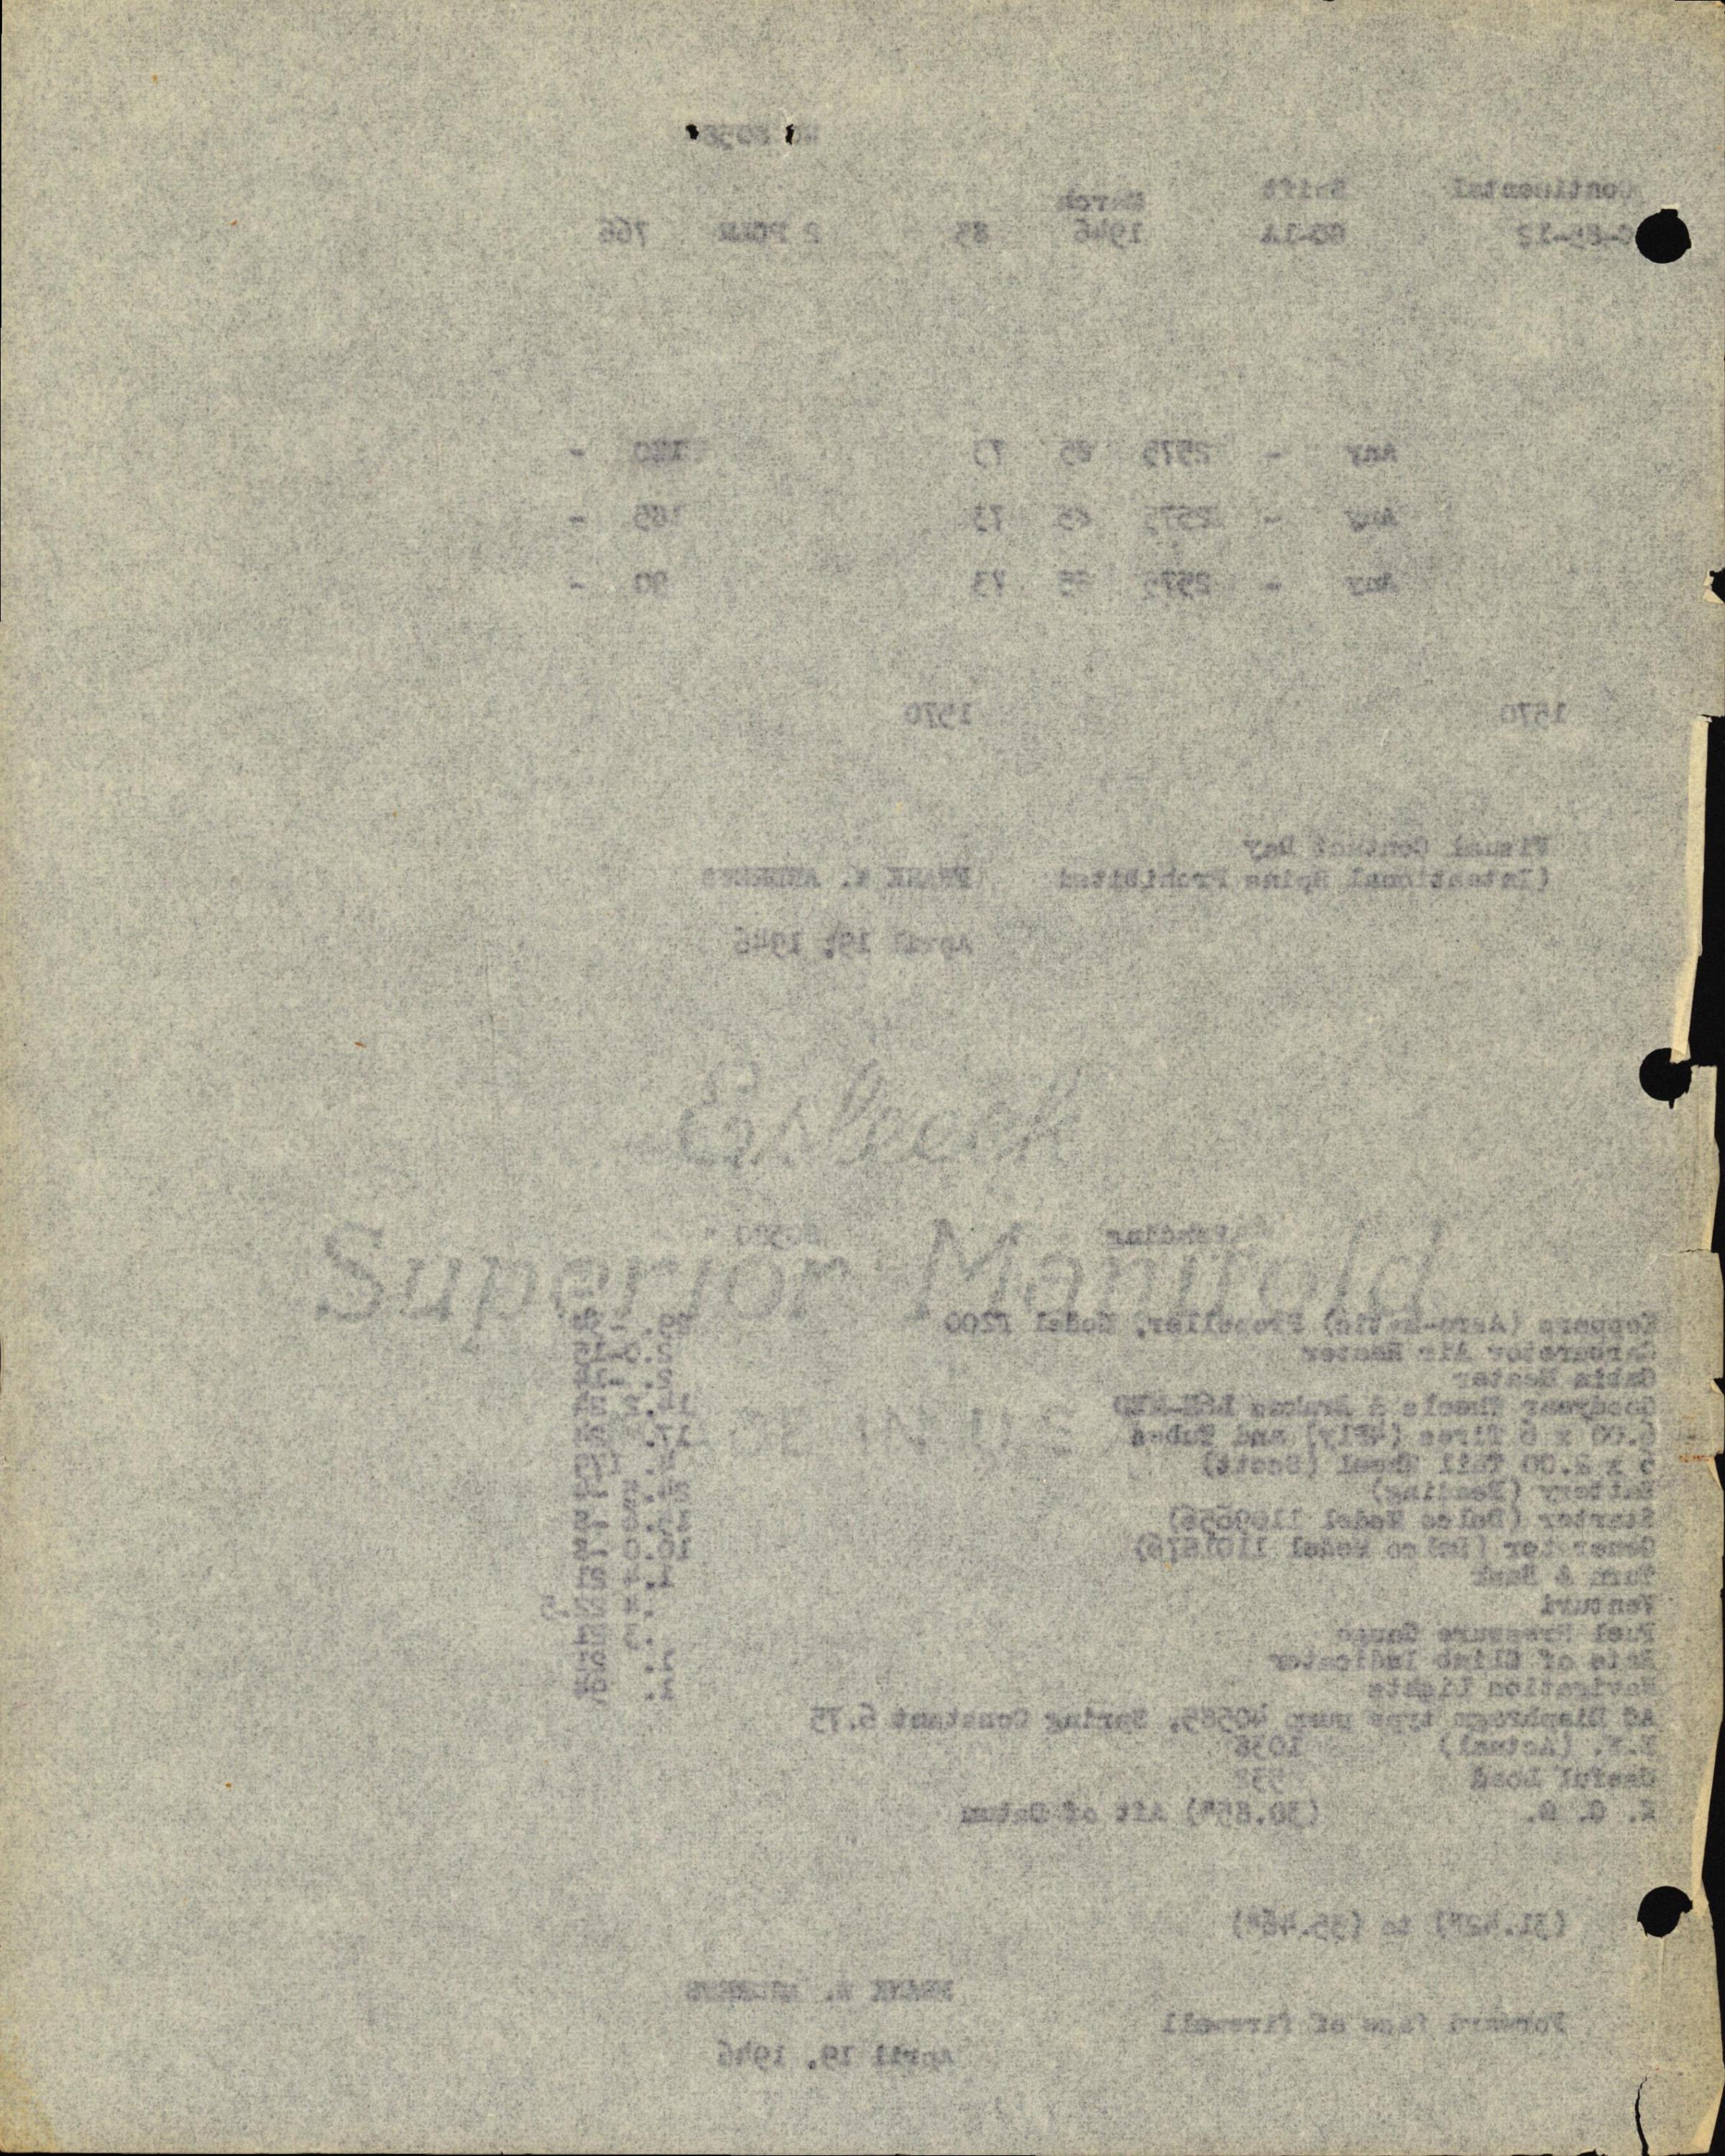 Sample page 8 from AirCorps Library document: Technical Information for Serial Number 83